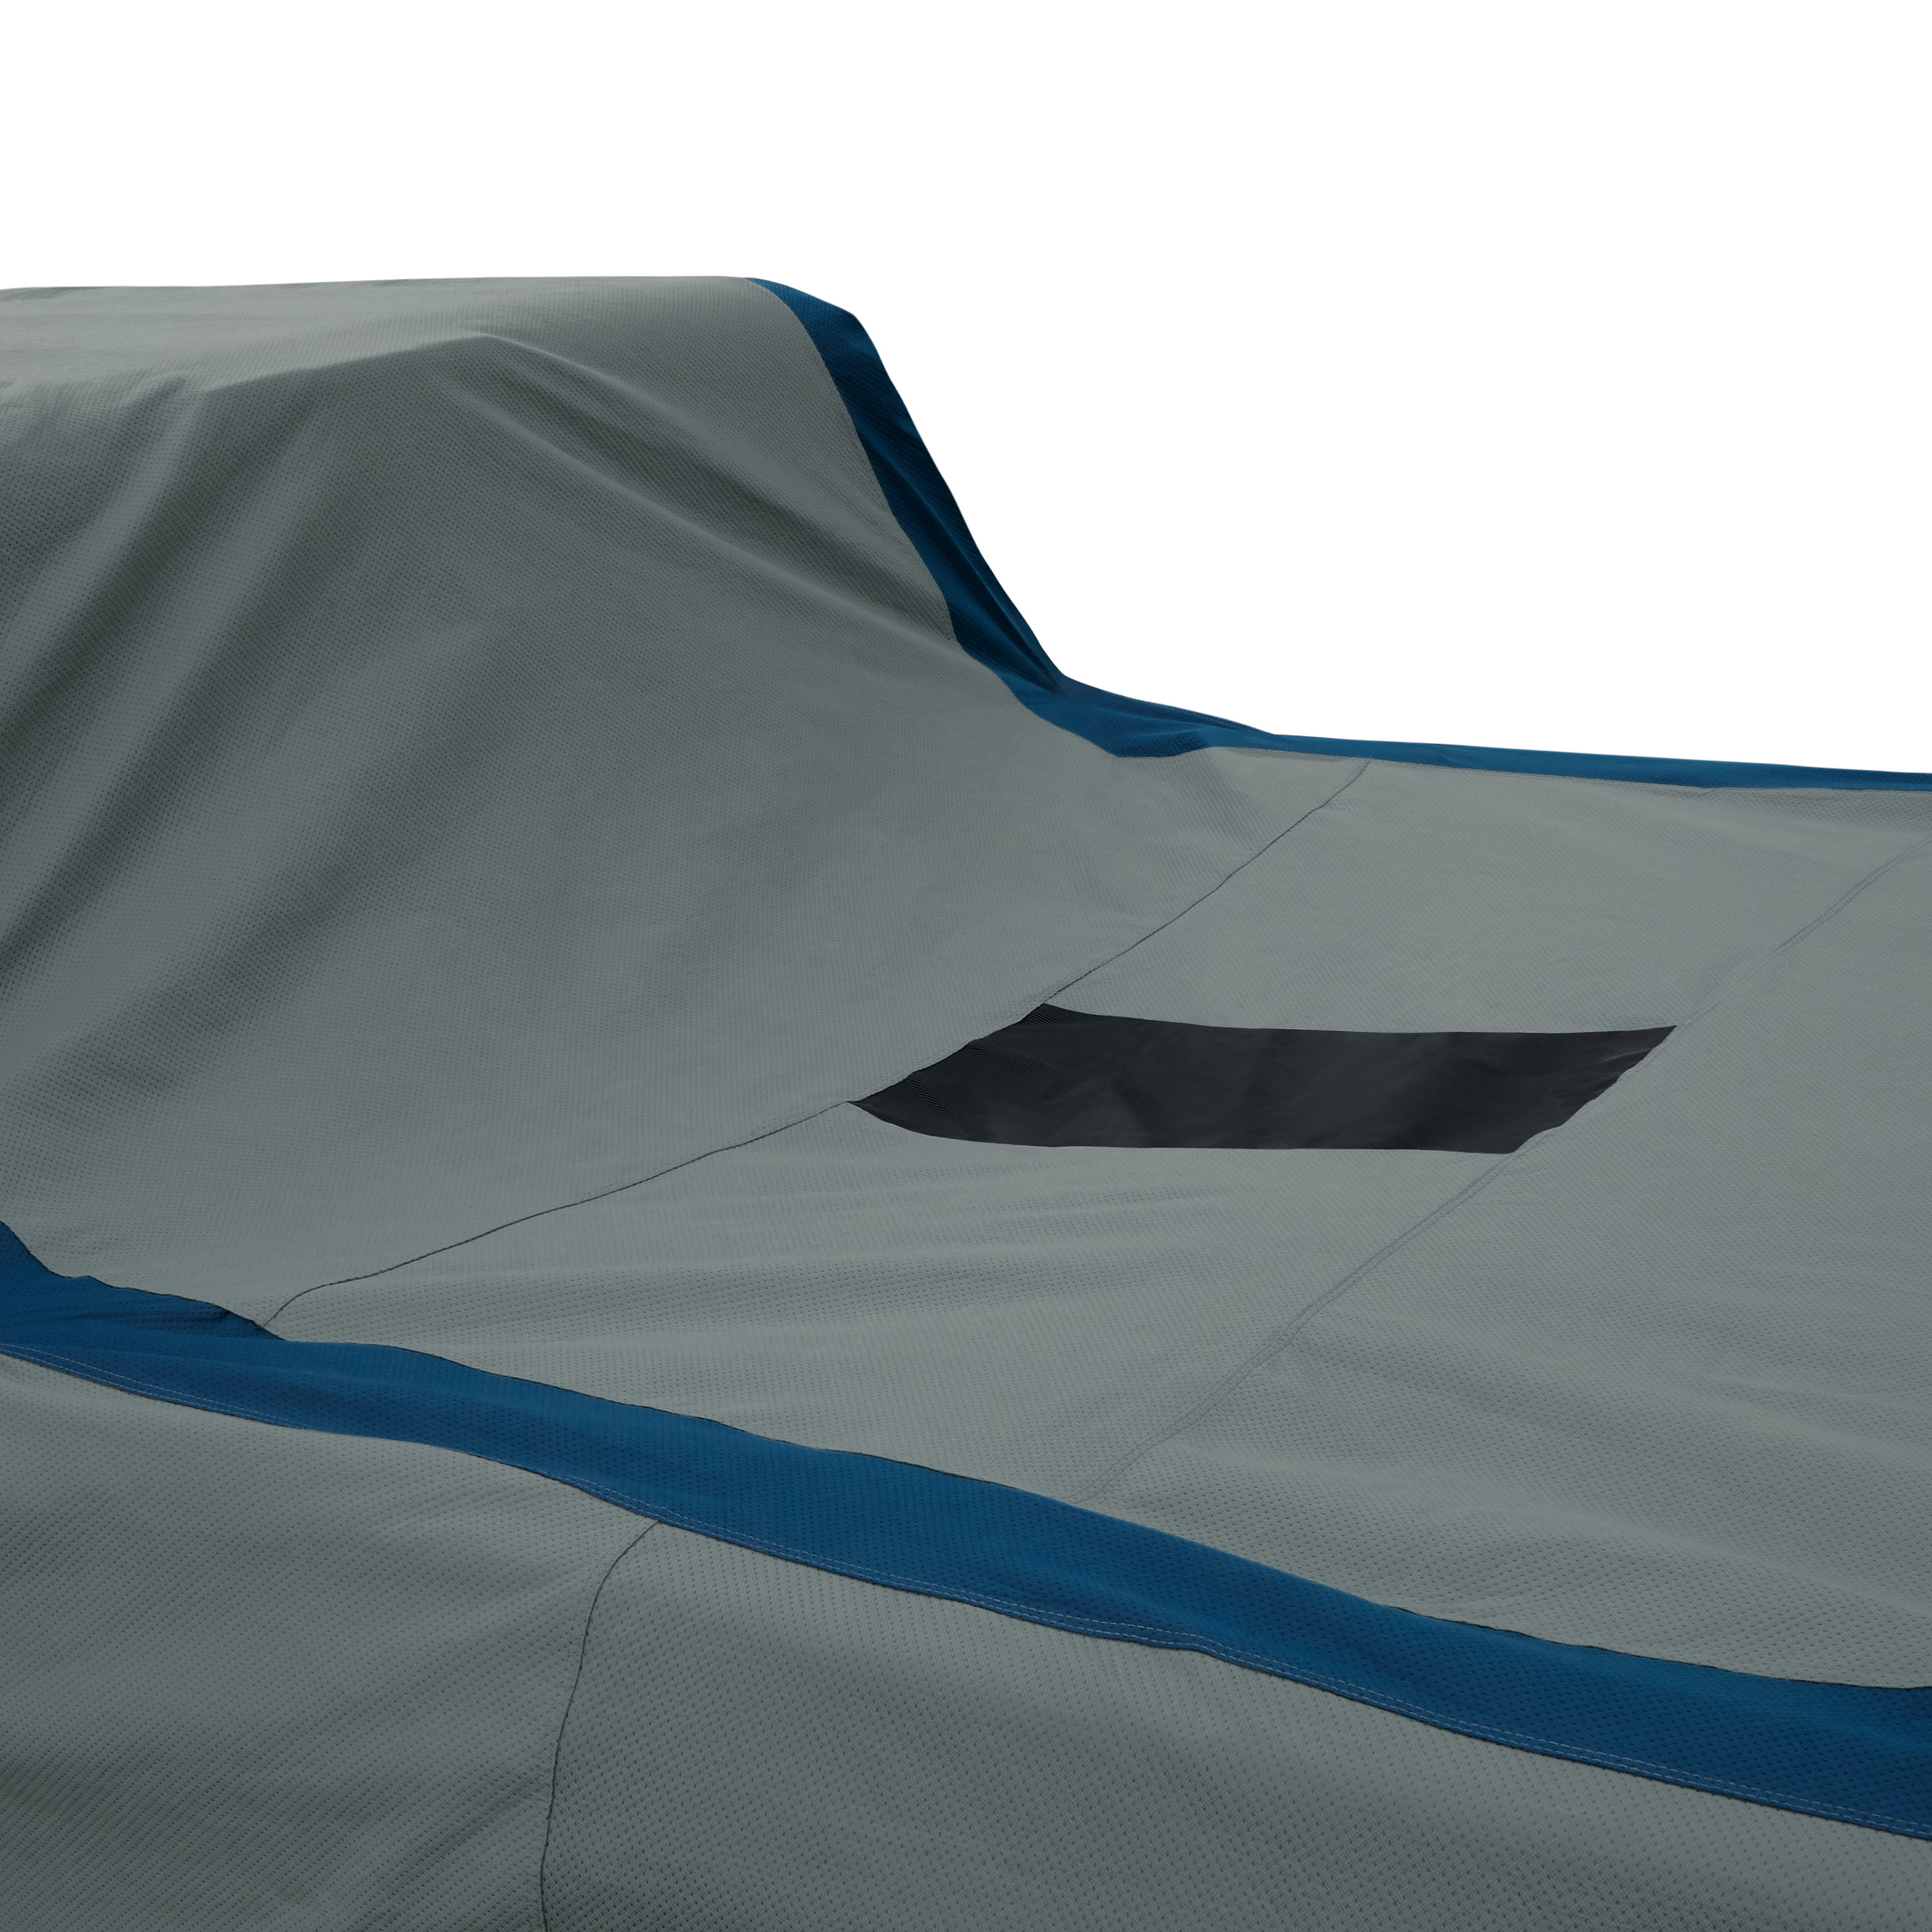 Standard Cabs up to 163L Duck Covers A3CMT197 Weather Defender Truck Cover with StormFlow